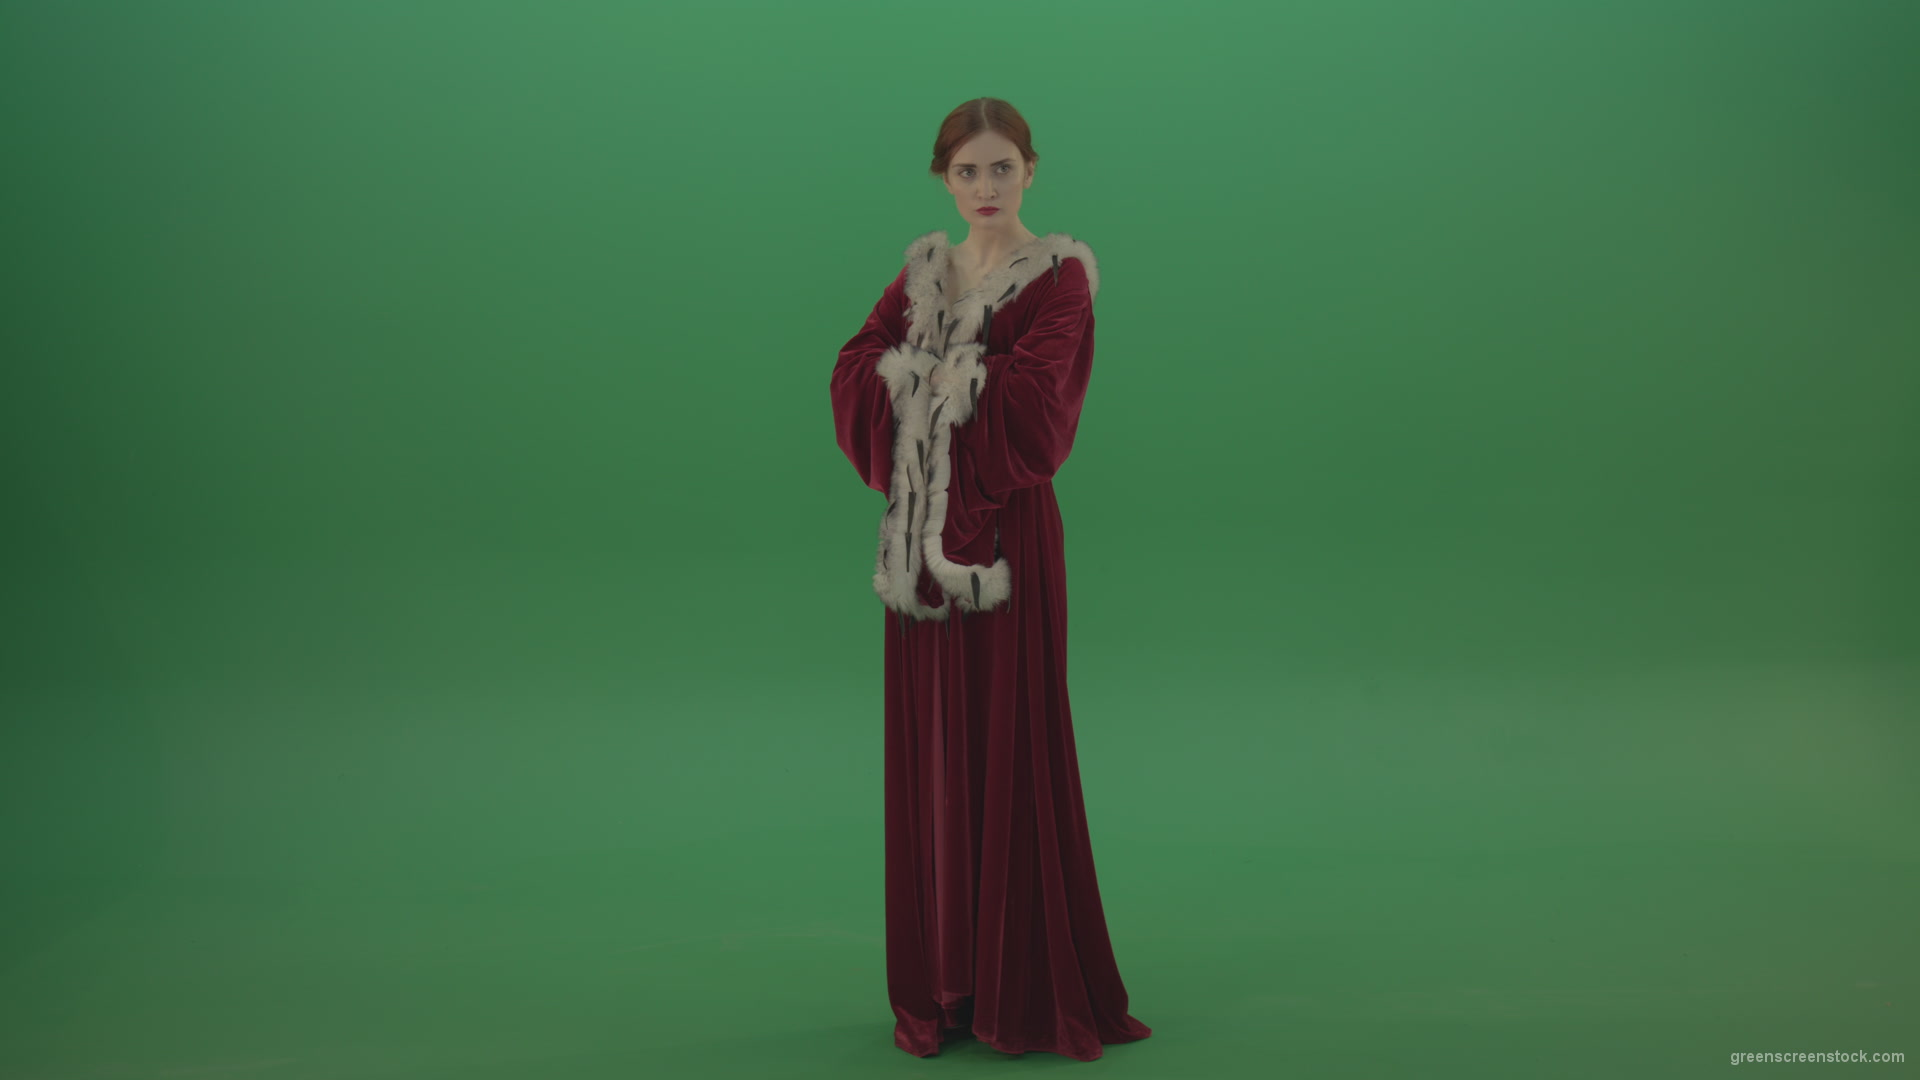 Young-actress-dressed-in-royal-dress-showing-different-scenes_007 Green Screen Stock